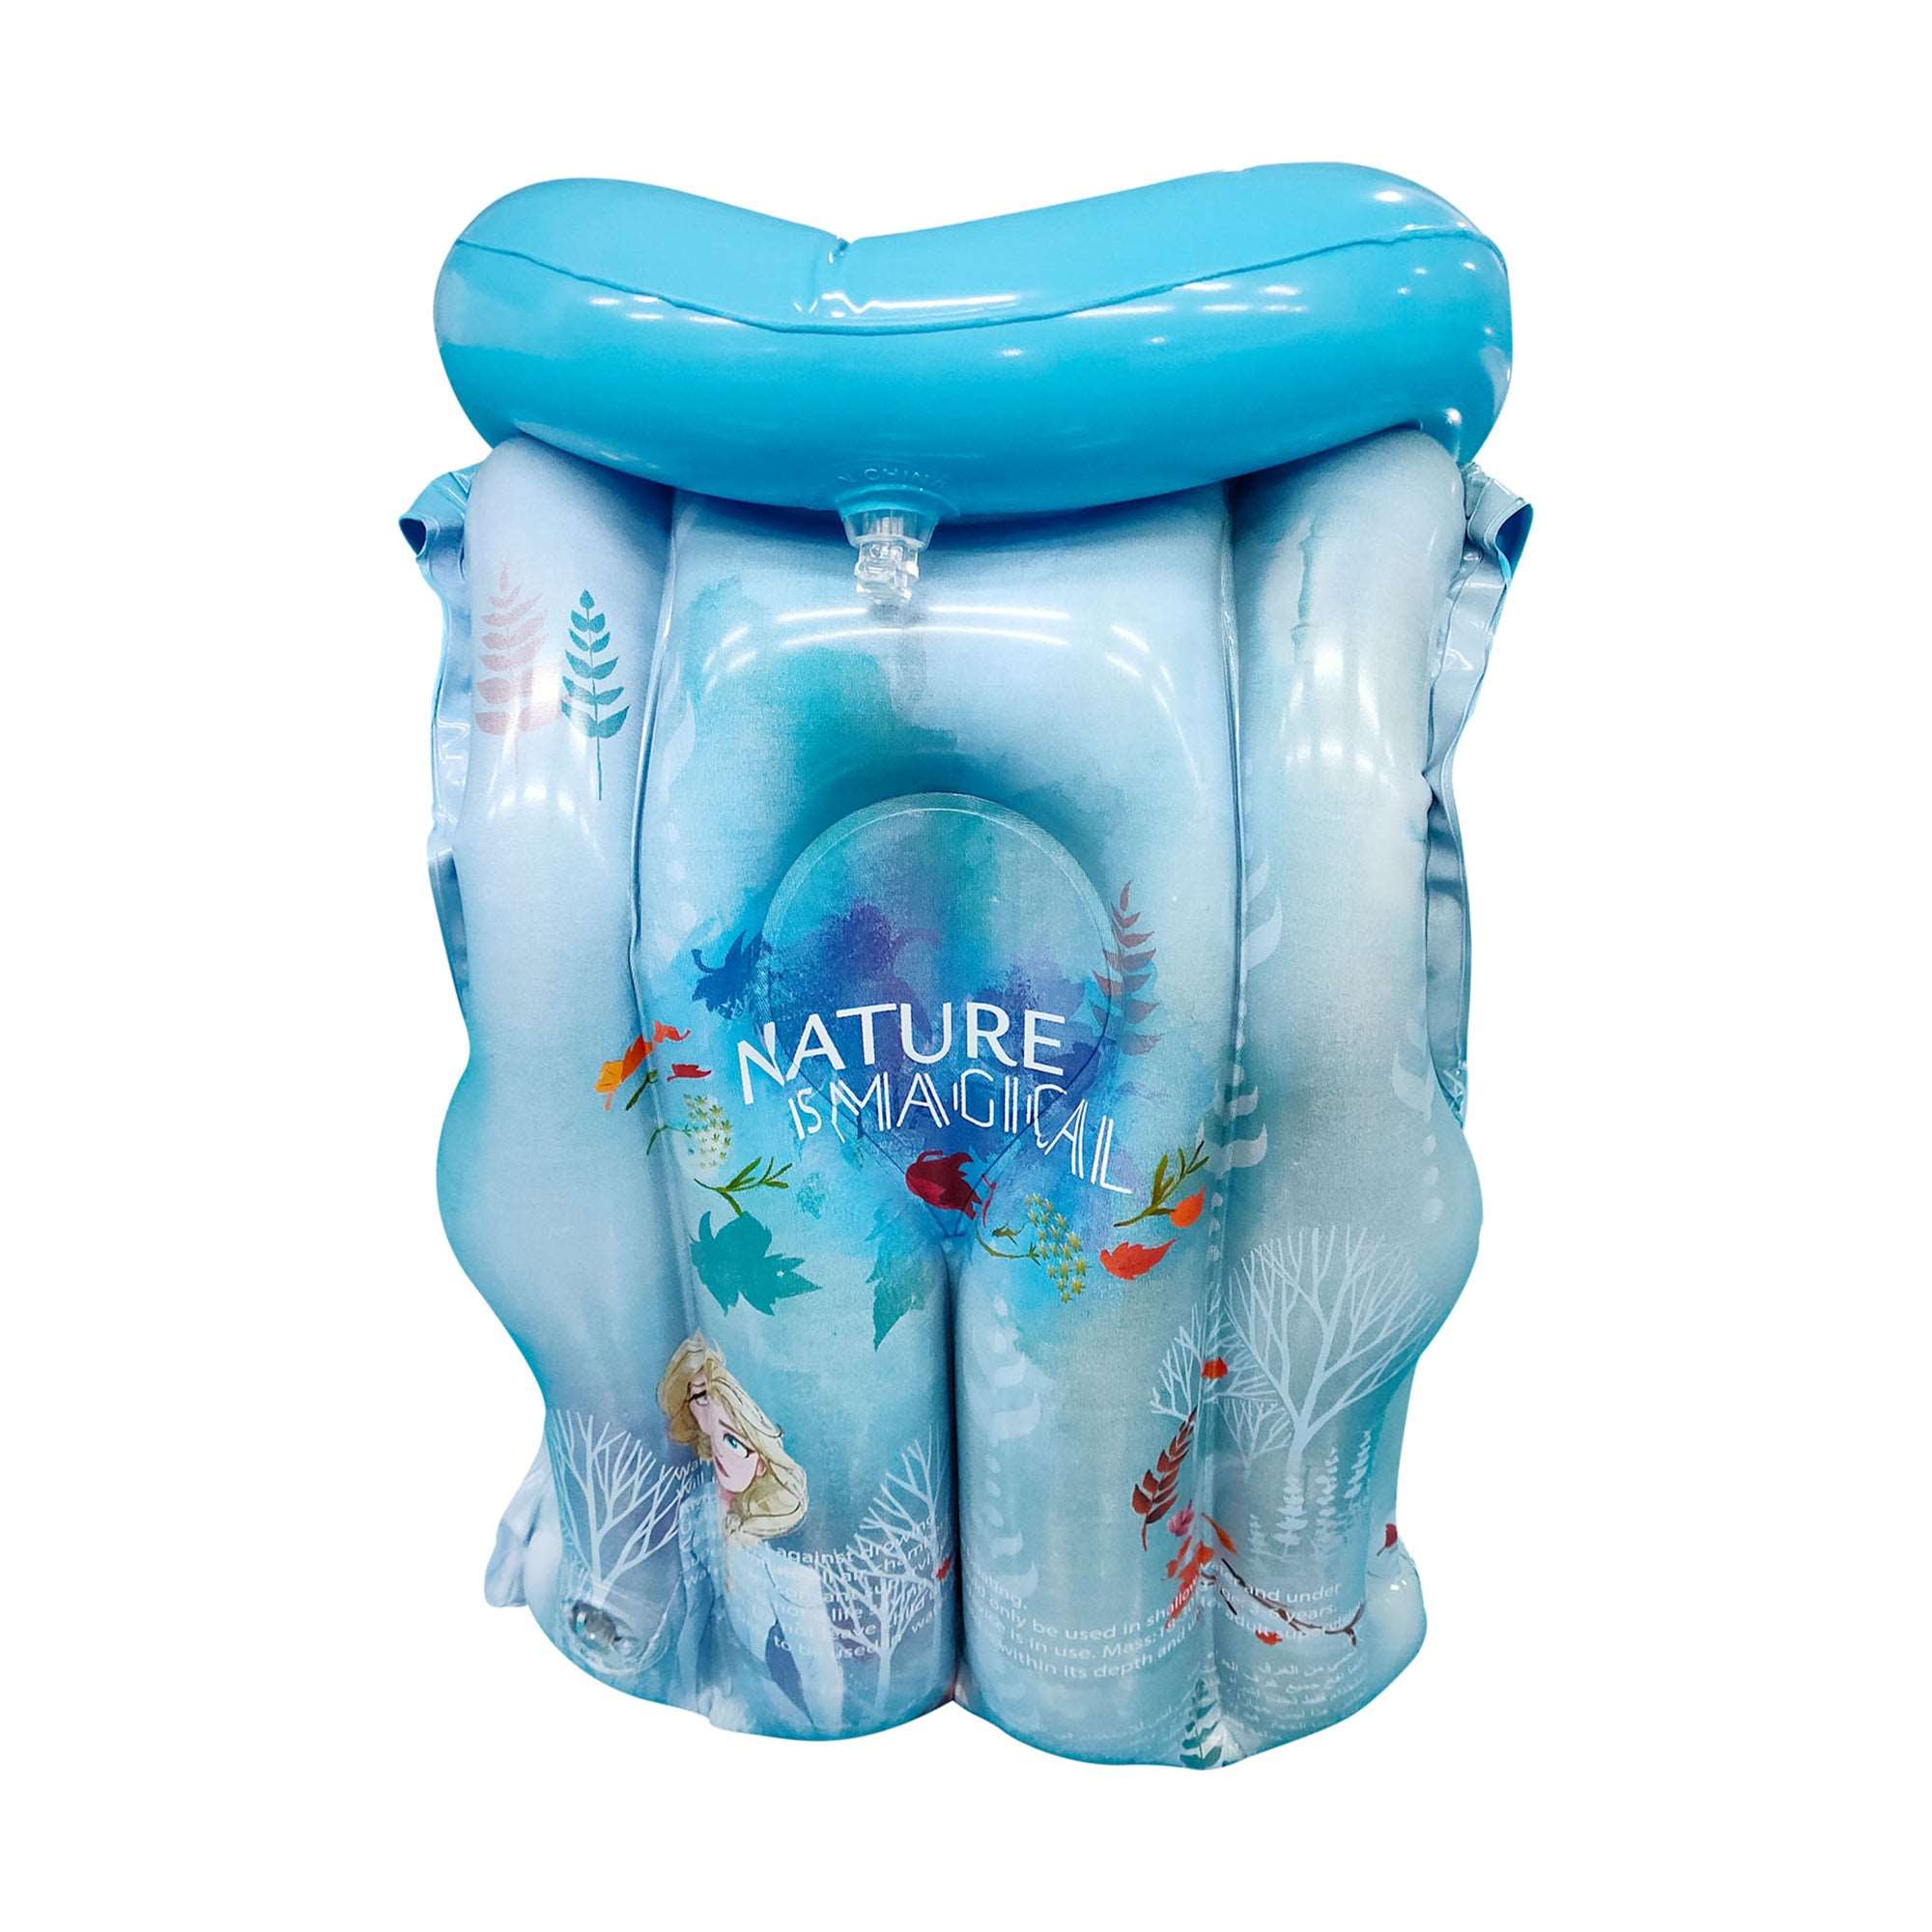 Disney Frozen Printed Kids Inflatable Swim Vest || 3-8 Years - Toys4All.in